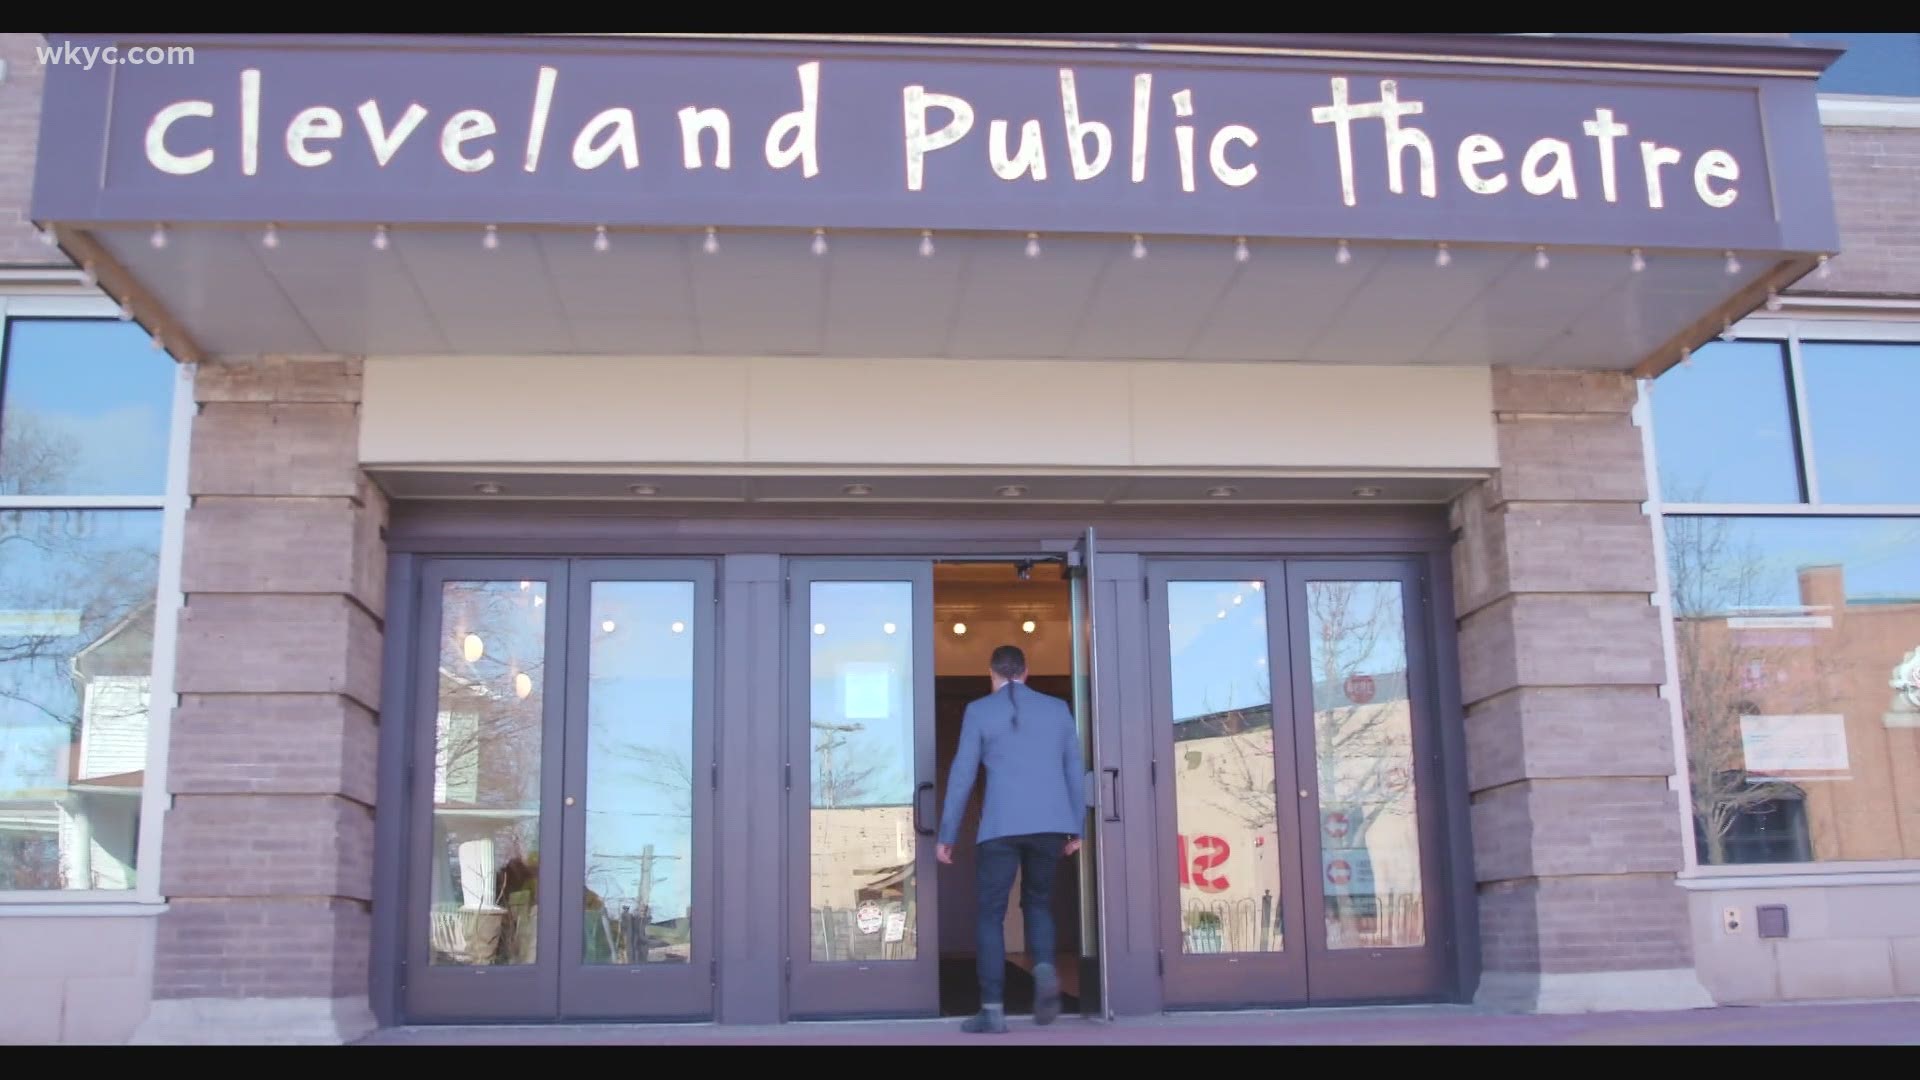 Meet some of the talented local artists who were awarded 2020-21 Premiere Fellowships from Cleveland Public Theatre. Chris Webb reports.